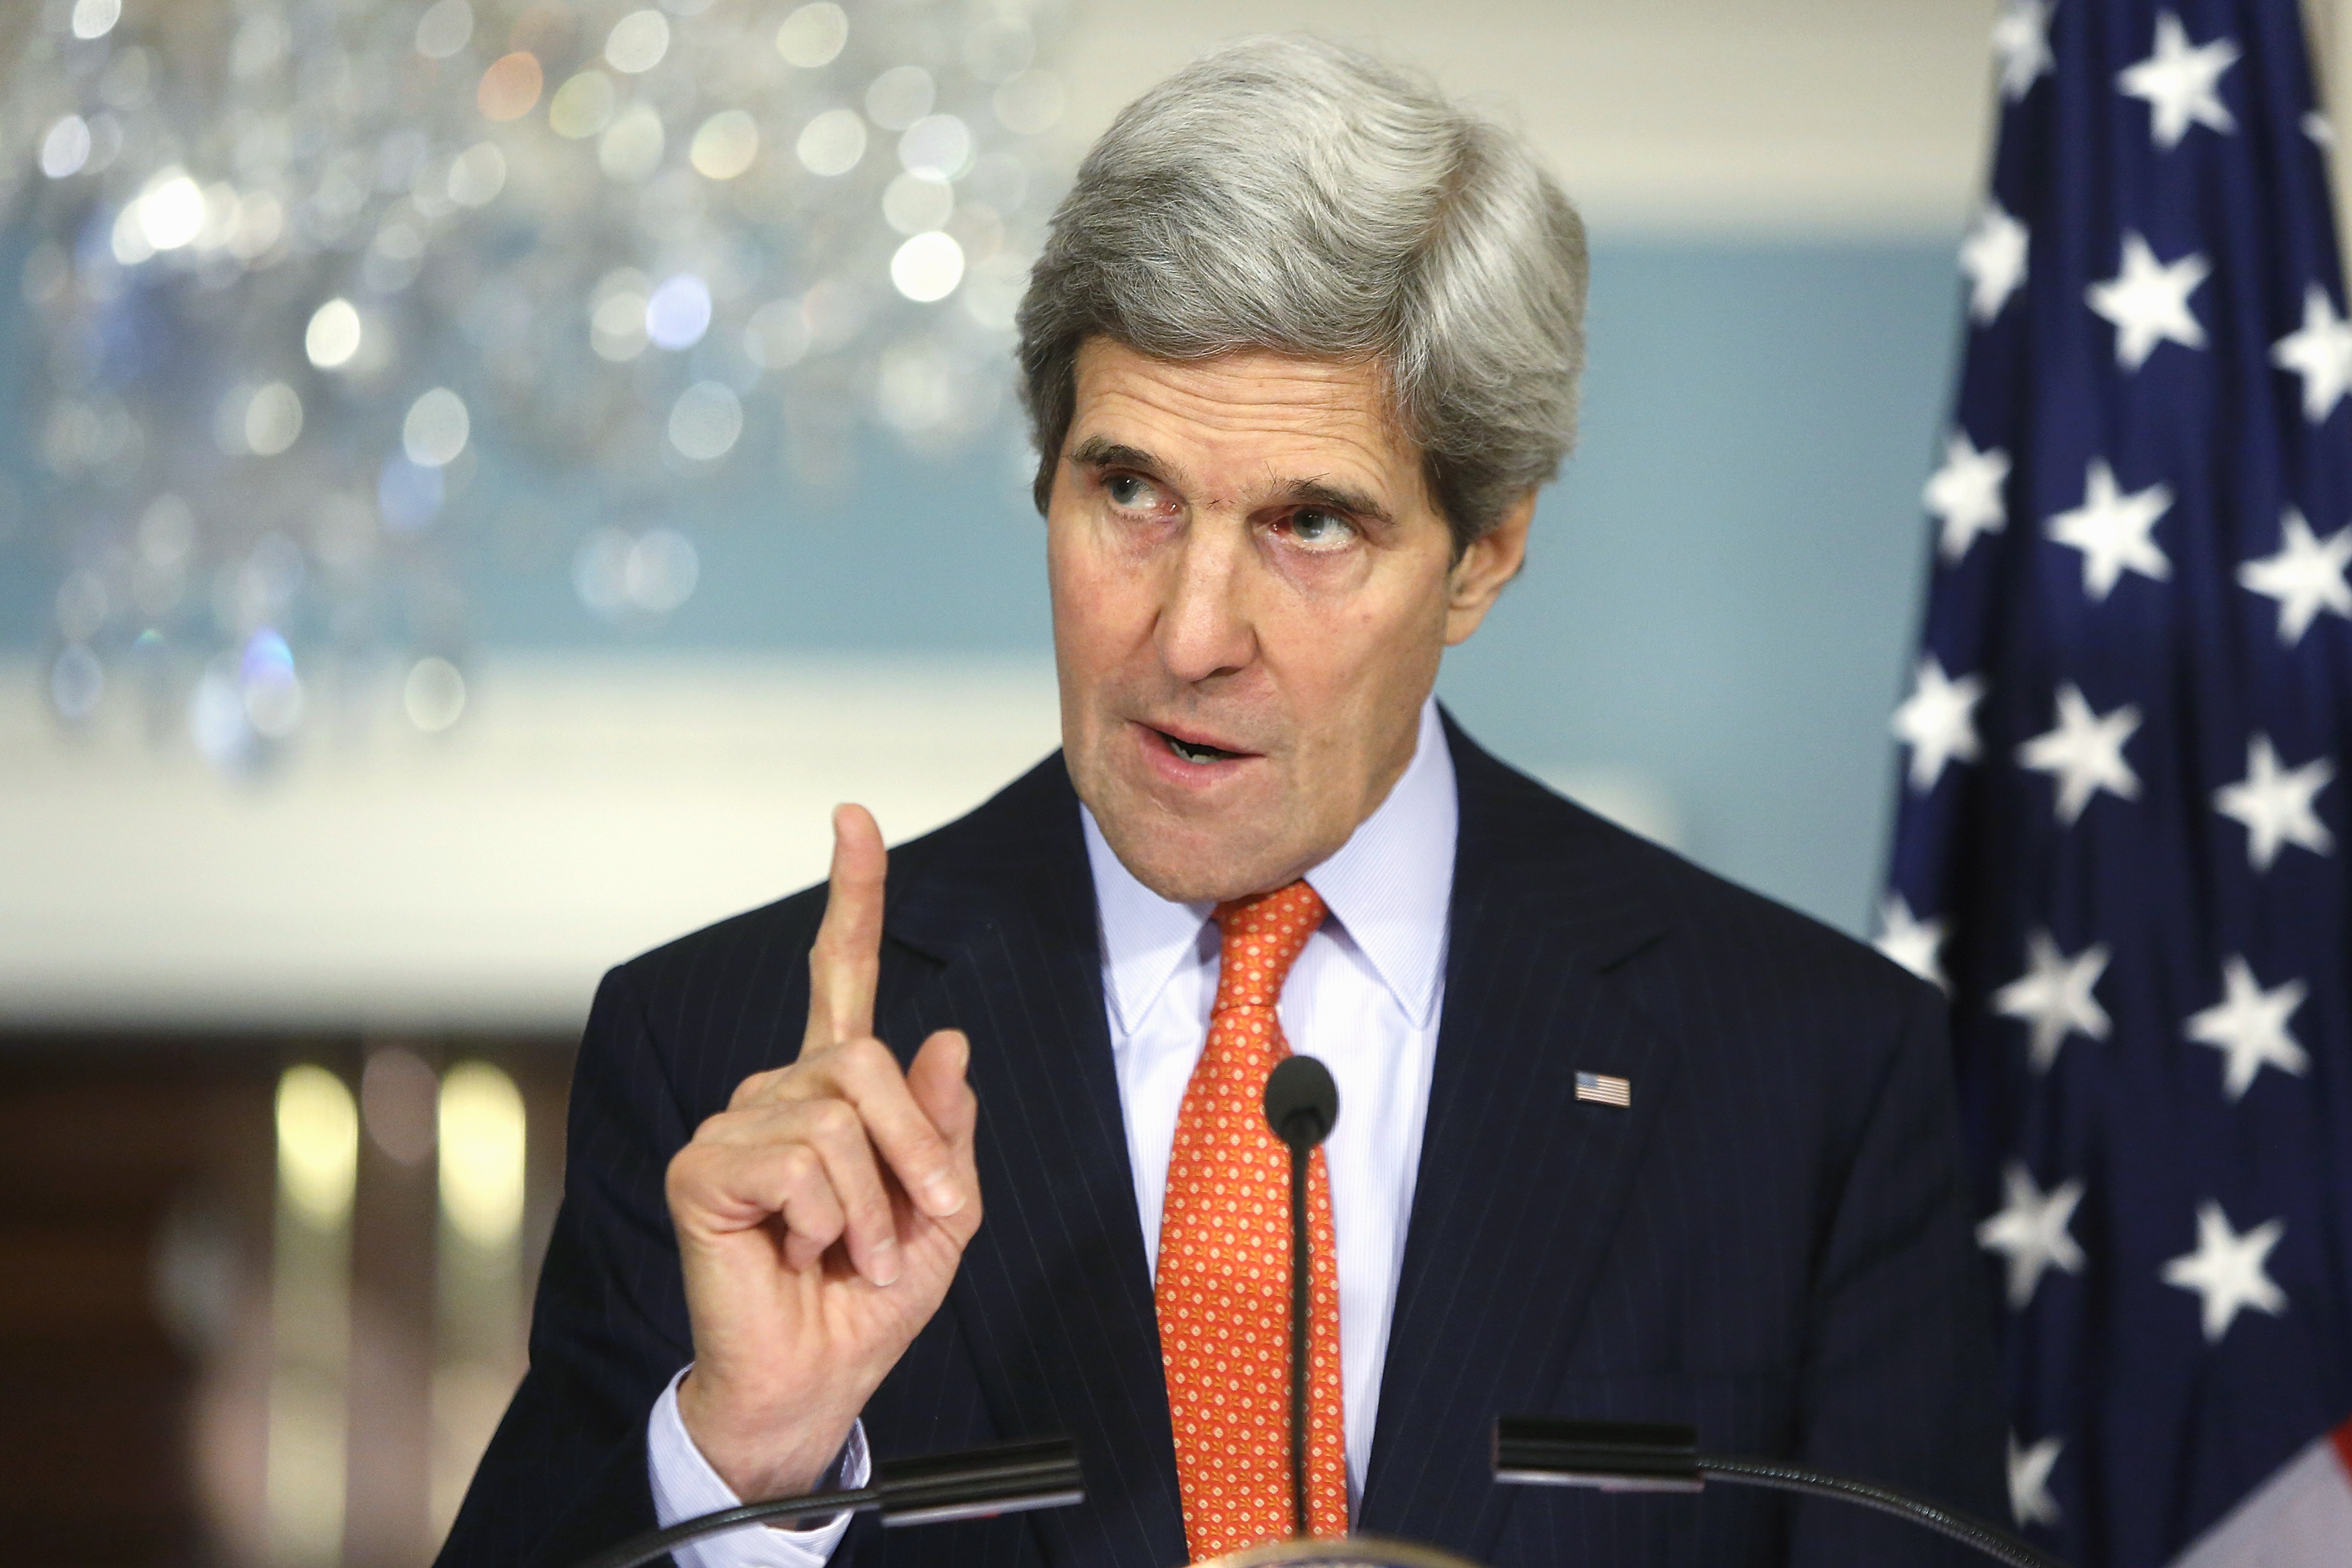 U.S. Secretary of State Kerry gestures as he addresses reporters alongside South Korea's Foreign Minister Yun at the State Department in Washington